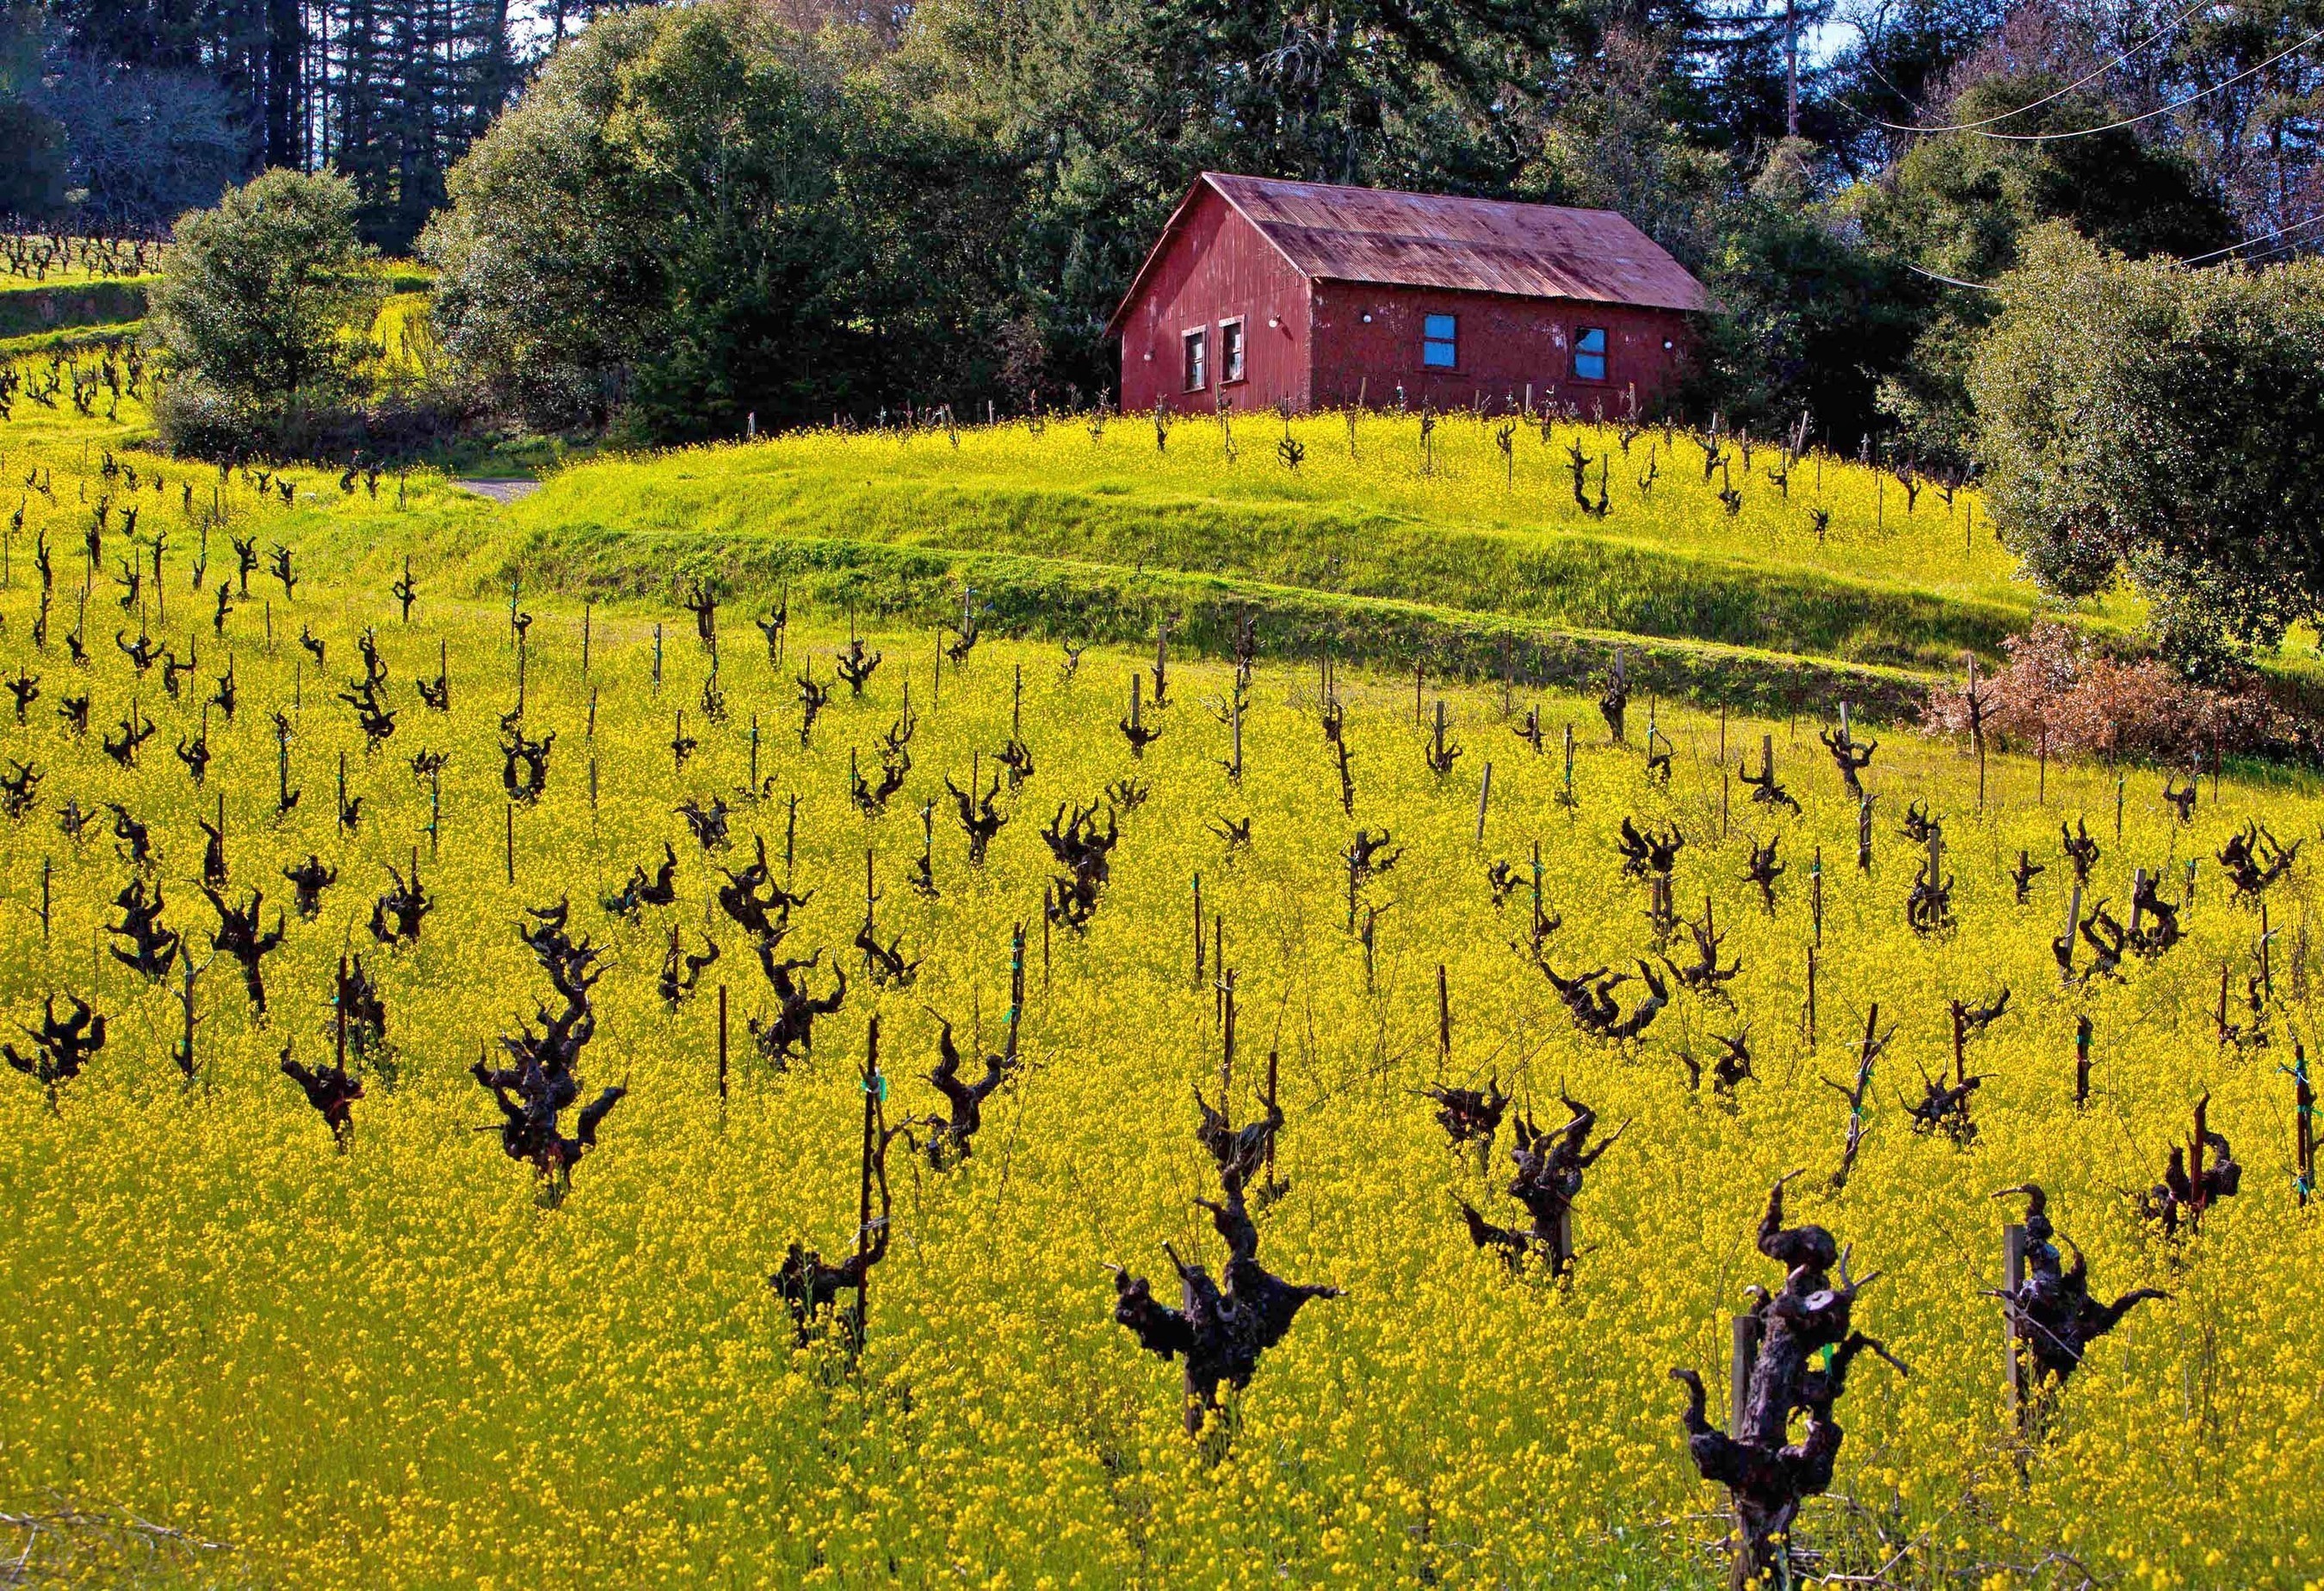 Gnarly vines are a familiar winter scene as visitors explore wineries and eateries in California wine country.